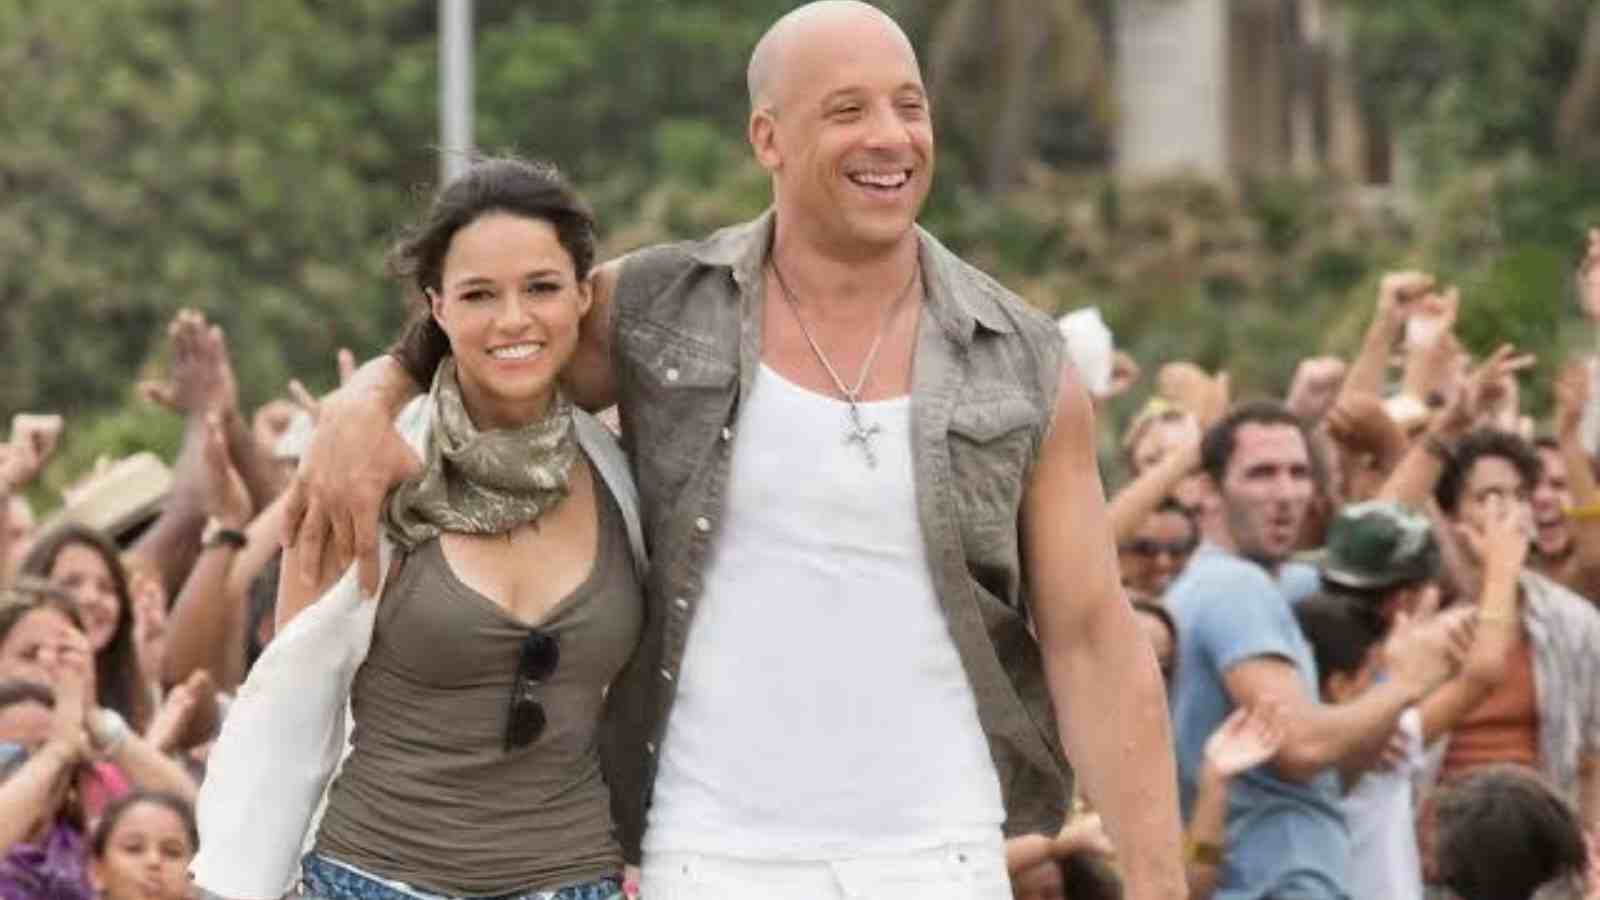 Michelle Rodriguez teases Vin Diesel of her role in Dungeons and Dragons